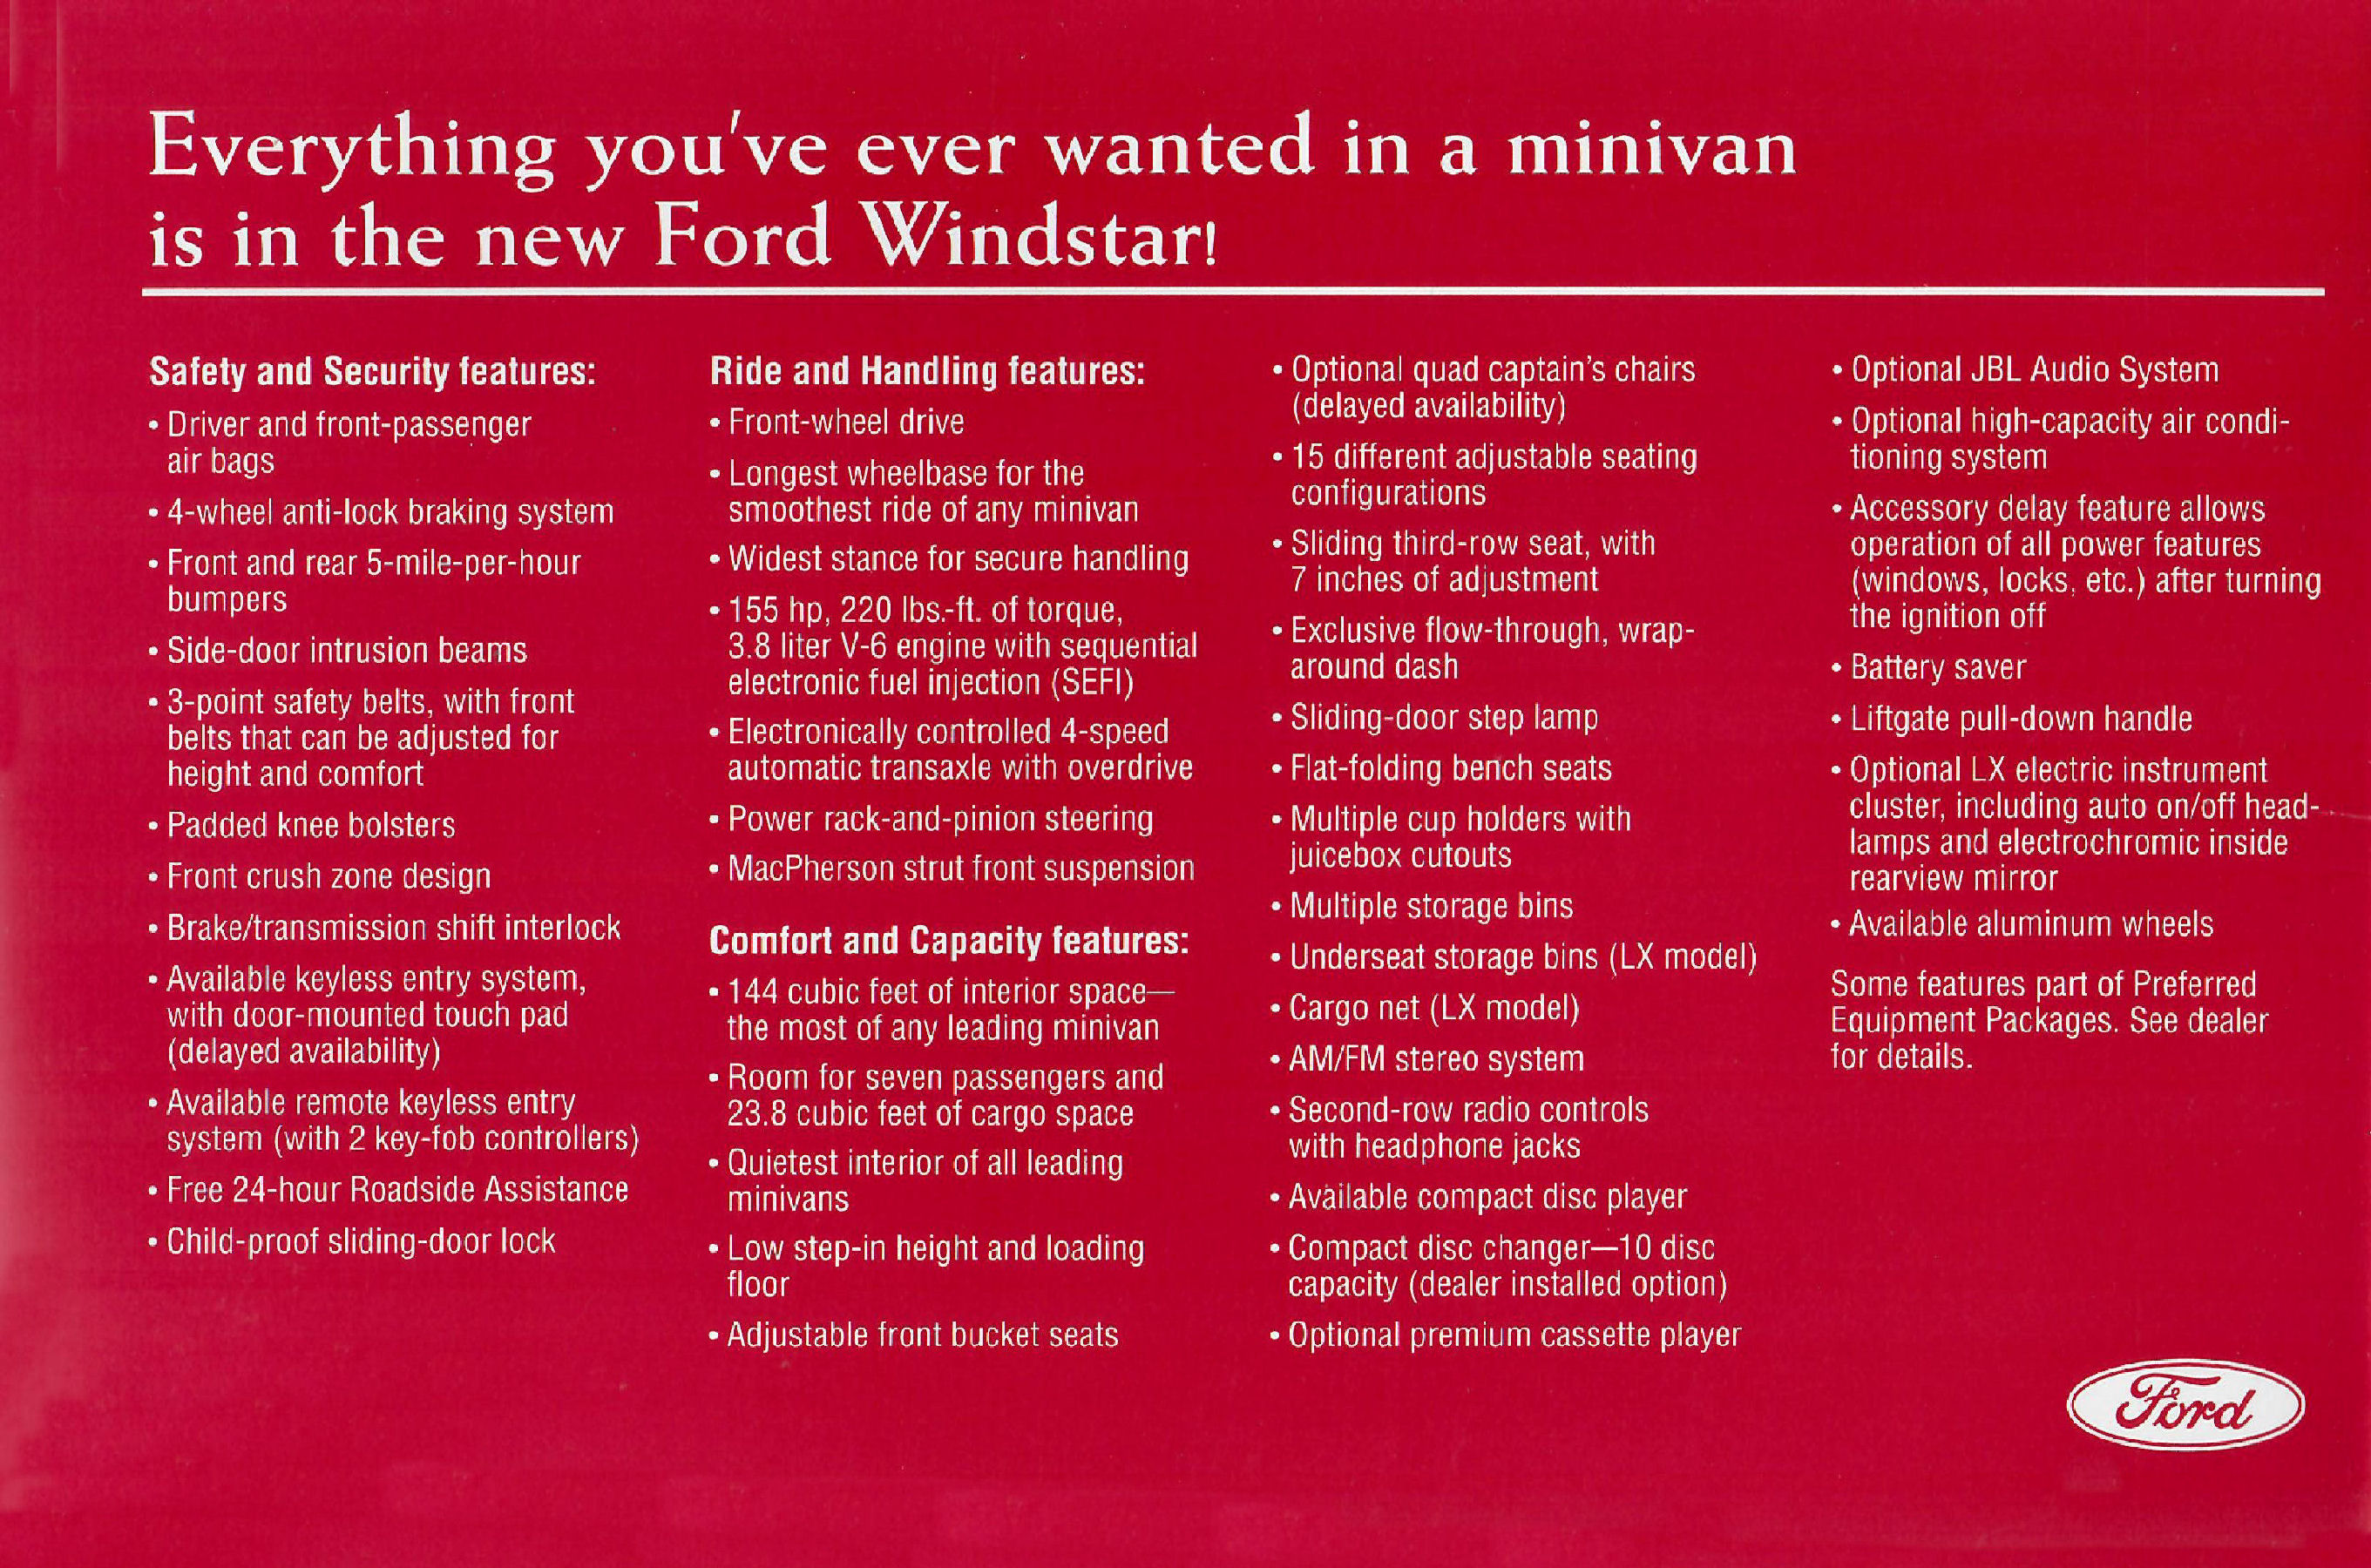 1995 Ford Windstar Intro Mailer-06